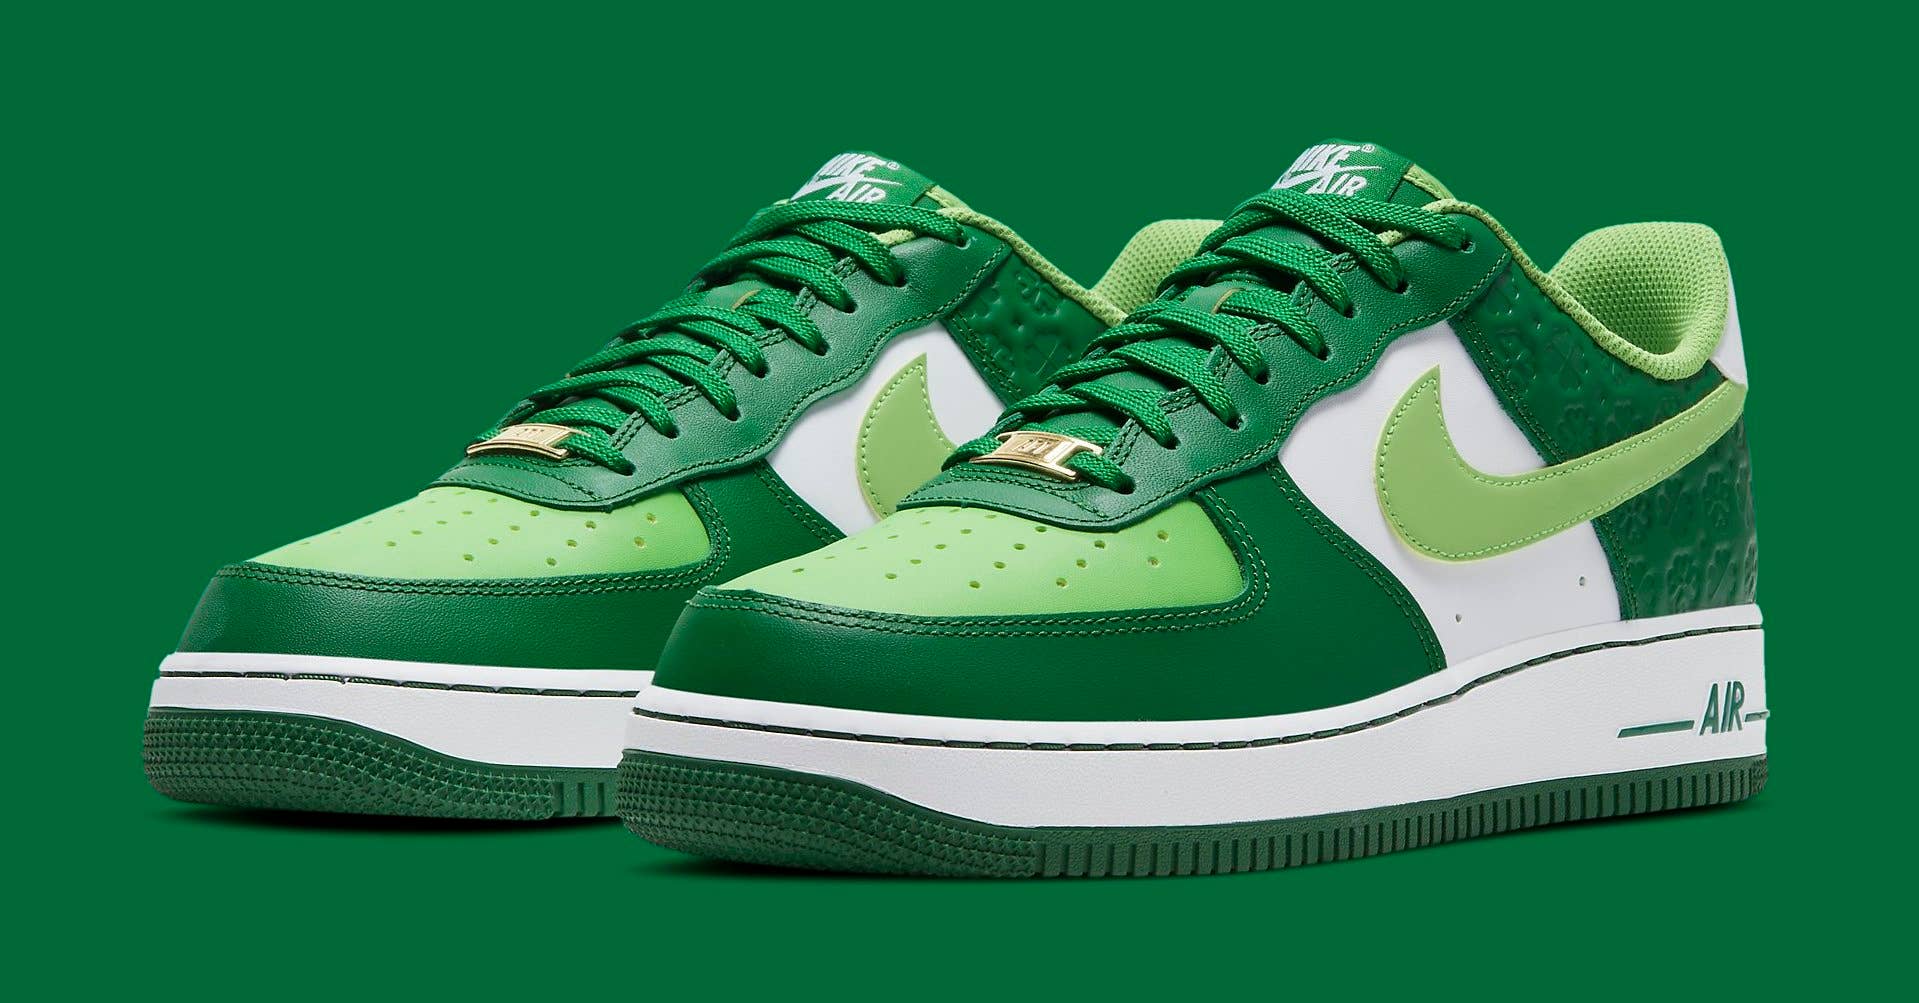 Nike Air Force 1 Low 'St. Patrick's Day' DD8458 300 Pair